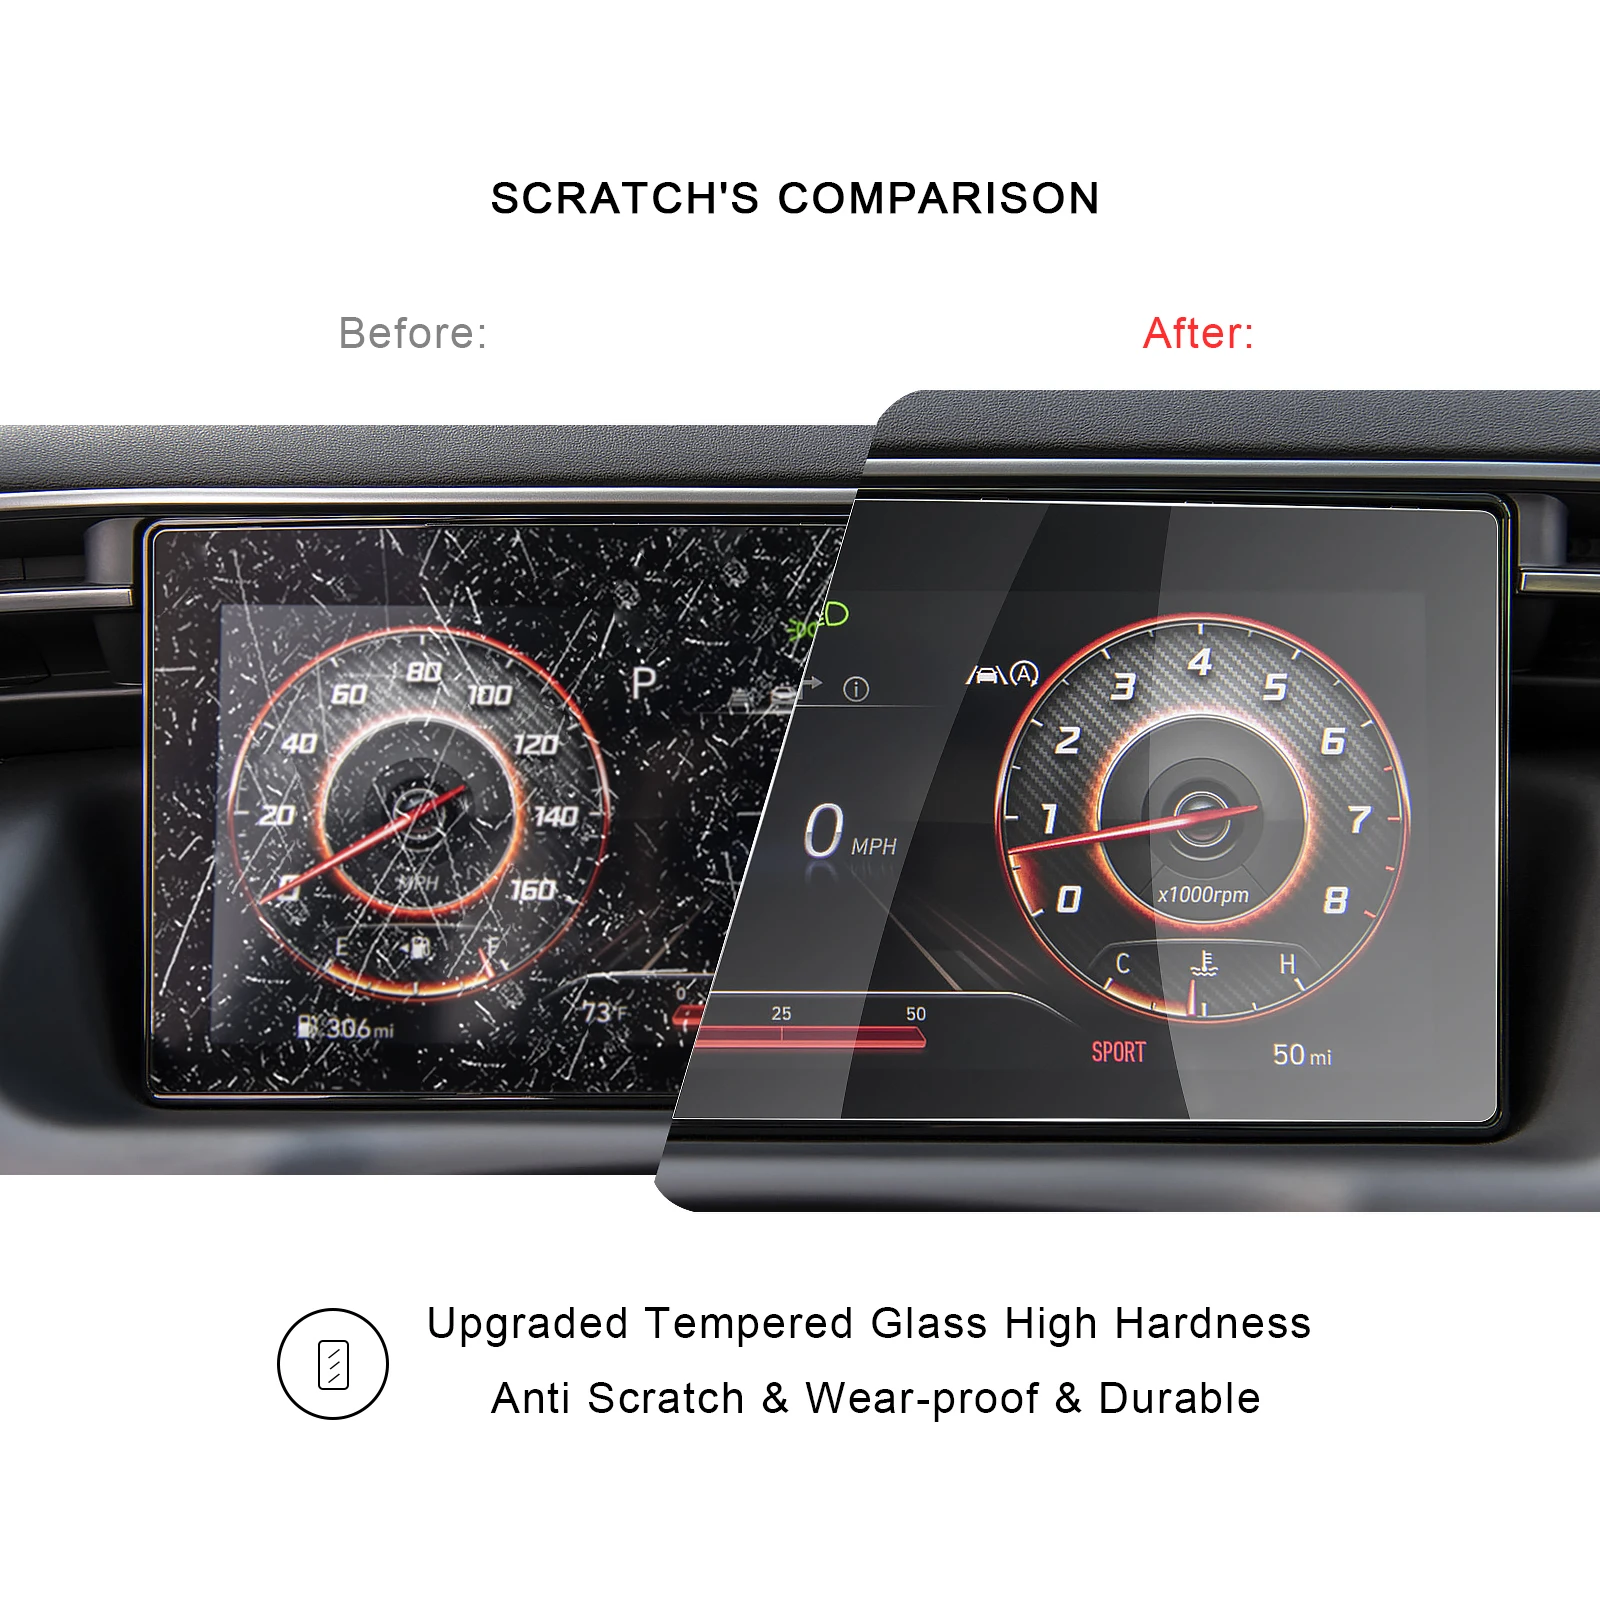 ruiya car screen protector for tucson nx4 2021 10 25 inch lcd instrument panel display auto interior accessories tempered film free global shipping